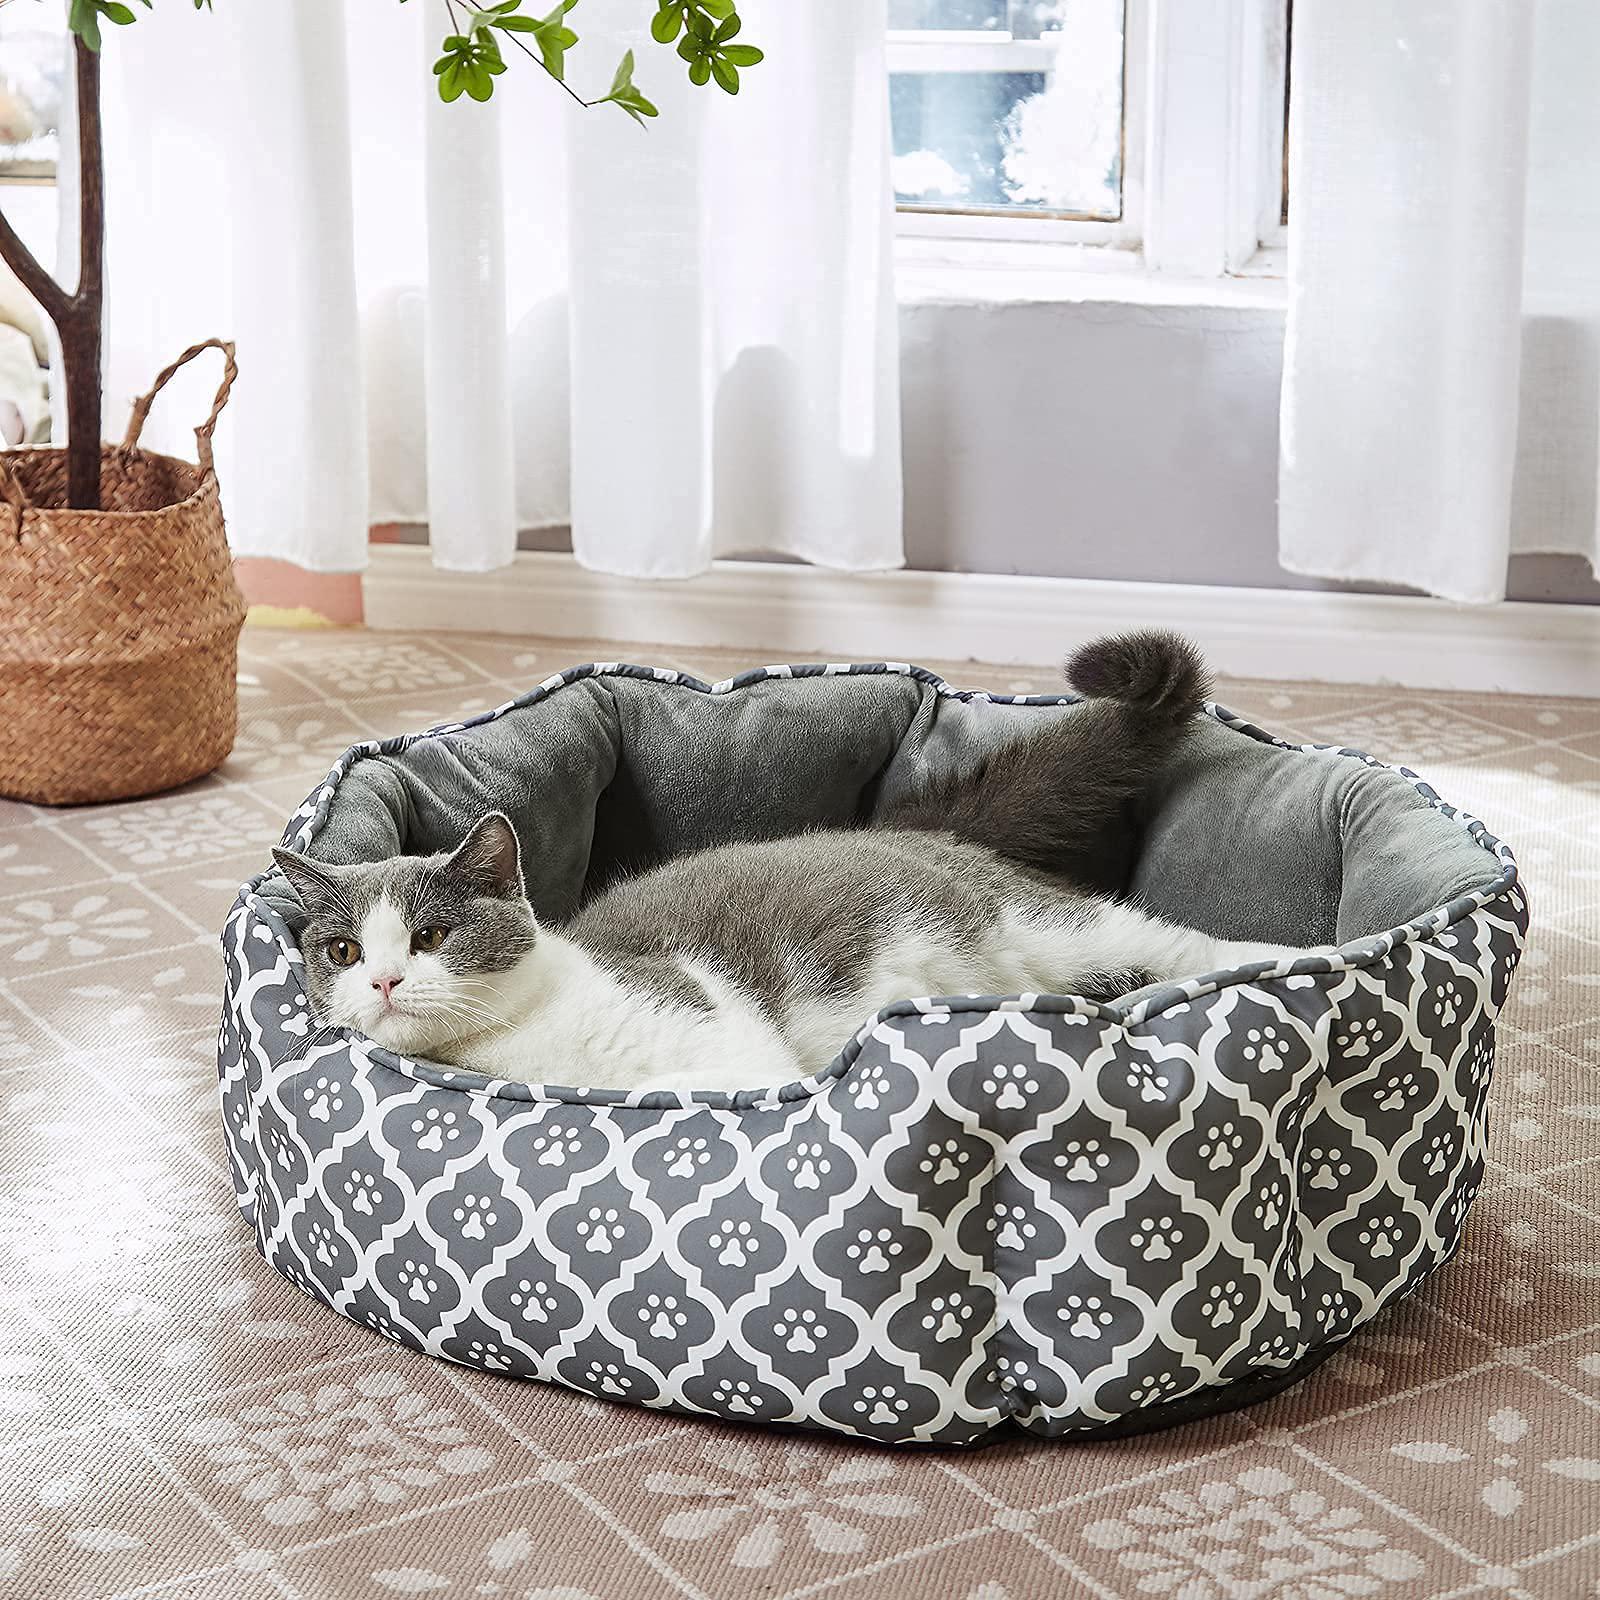 luckitty 25 inch large cat bed,soft velvet & waterproof oxford two-sided cushion, easy washable,oval geometric pet beds for i